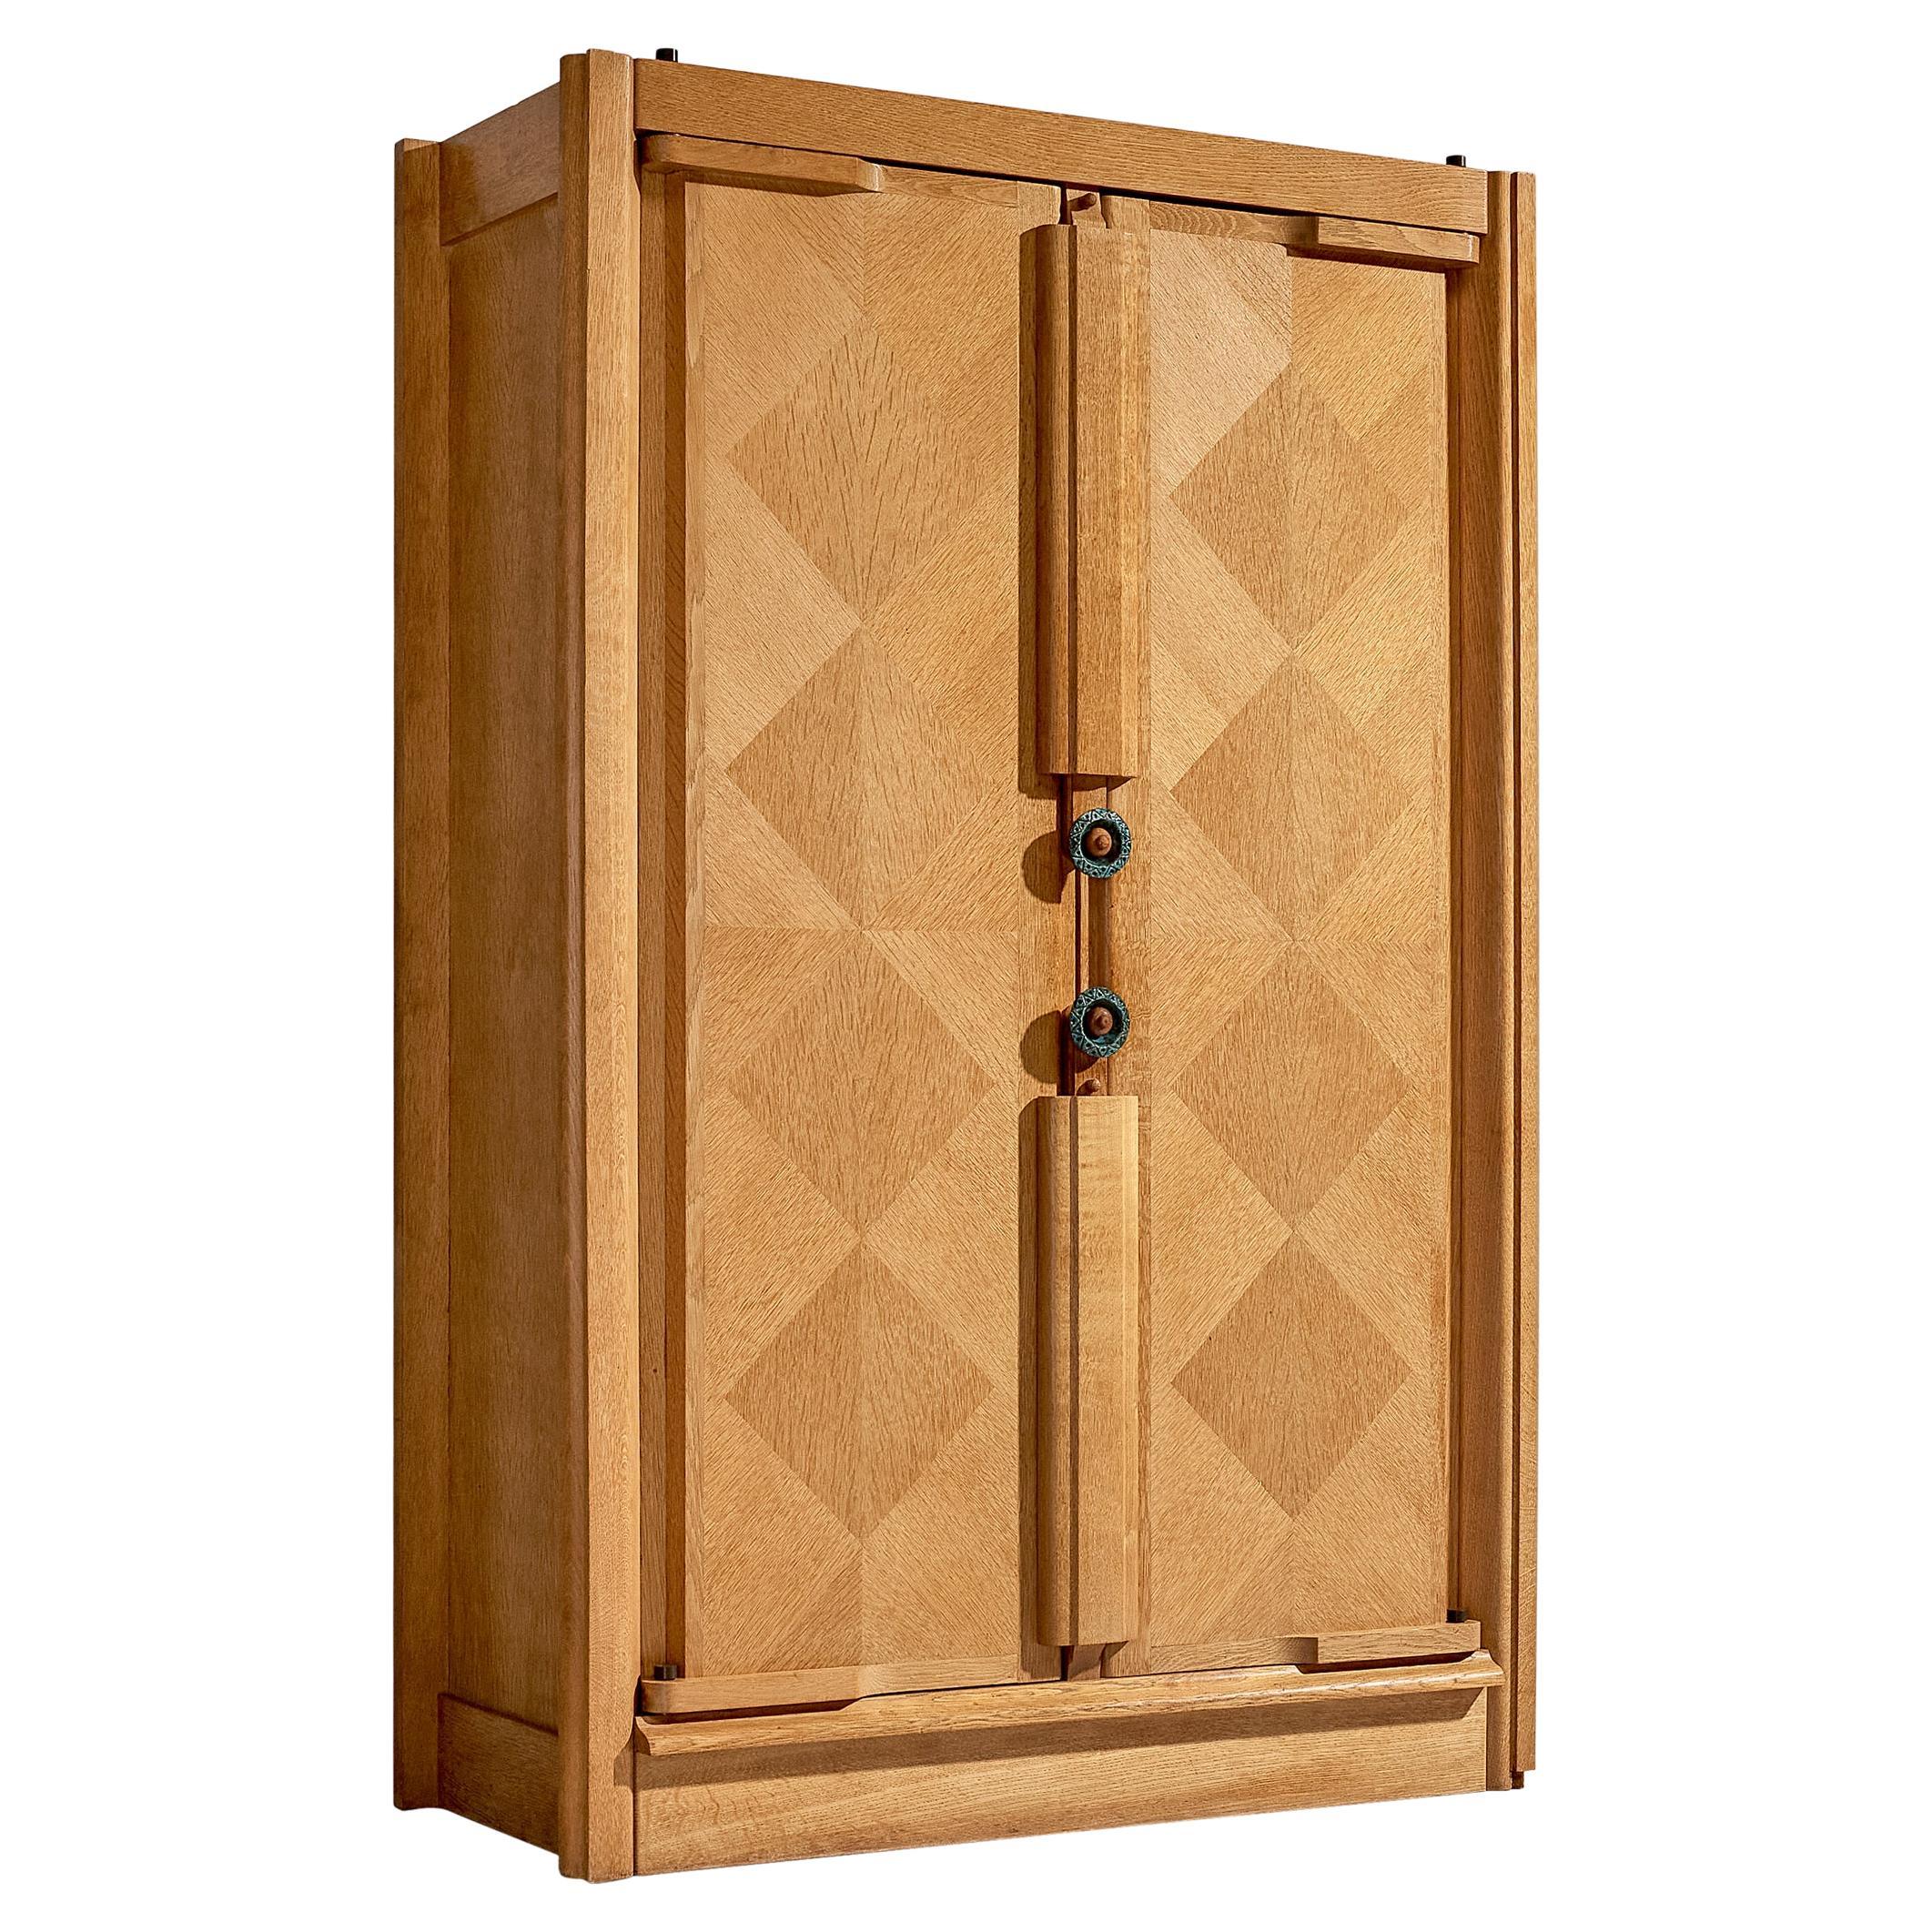 Guillerme & Chambron Large Cabinet in Oak with Ceramic Handles 